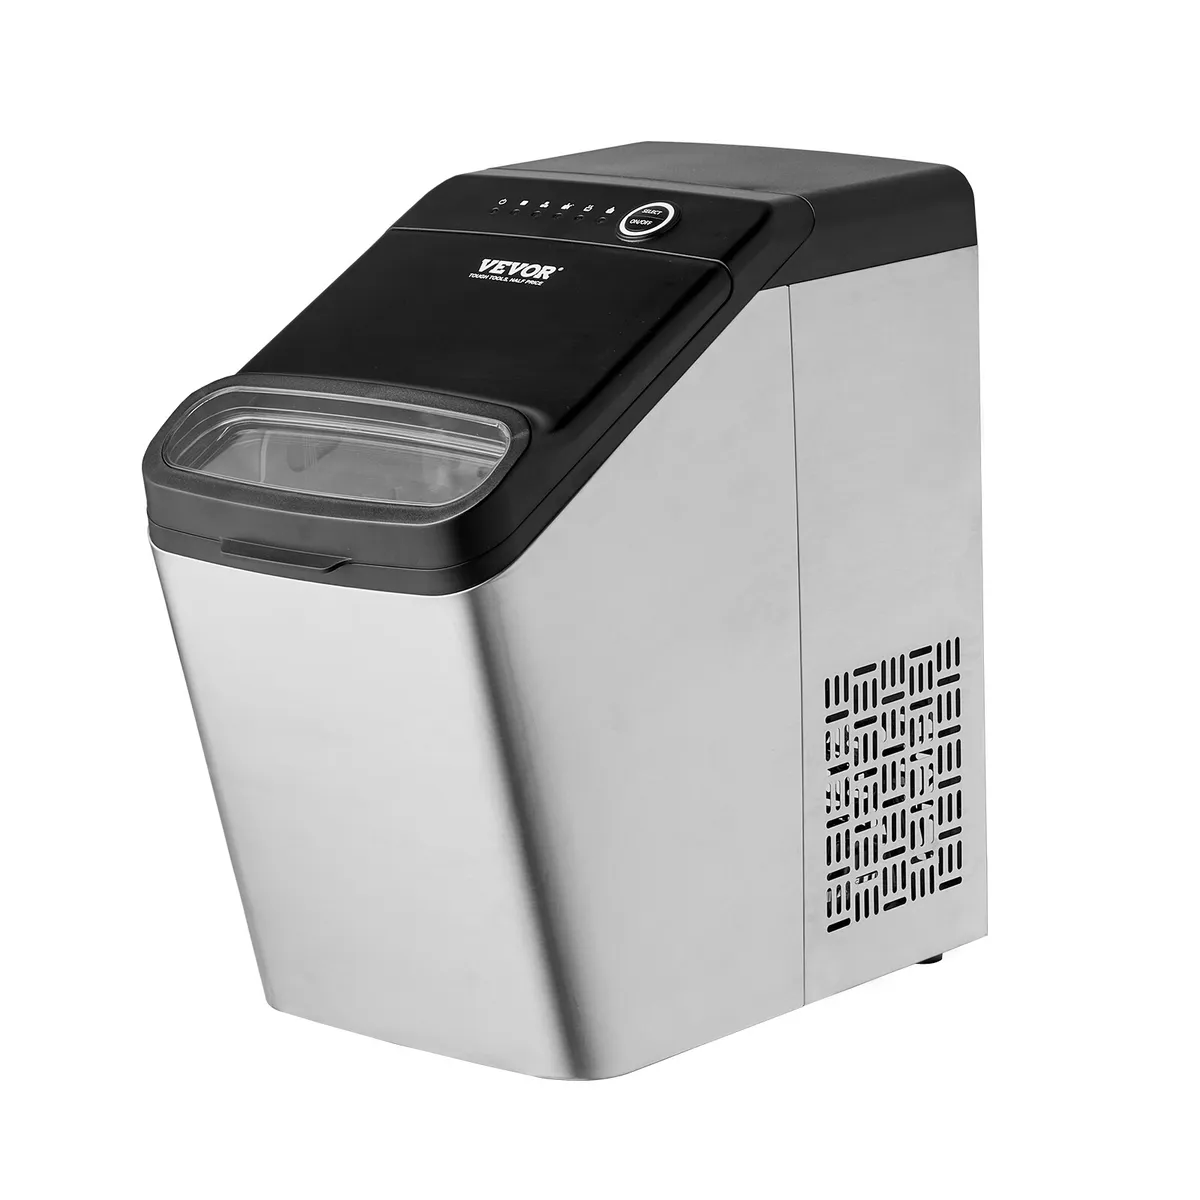 NEW - NEWAIR 33LB of Ice a Day Portable Countertop Ice Maker